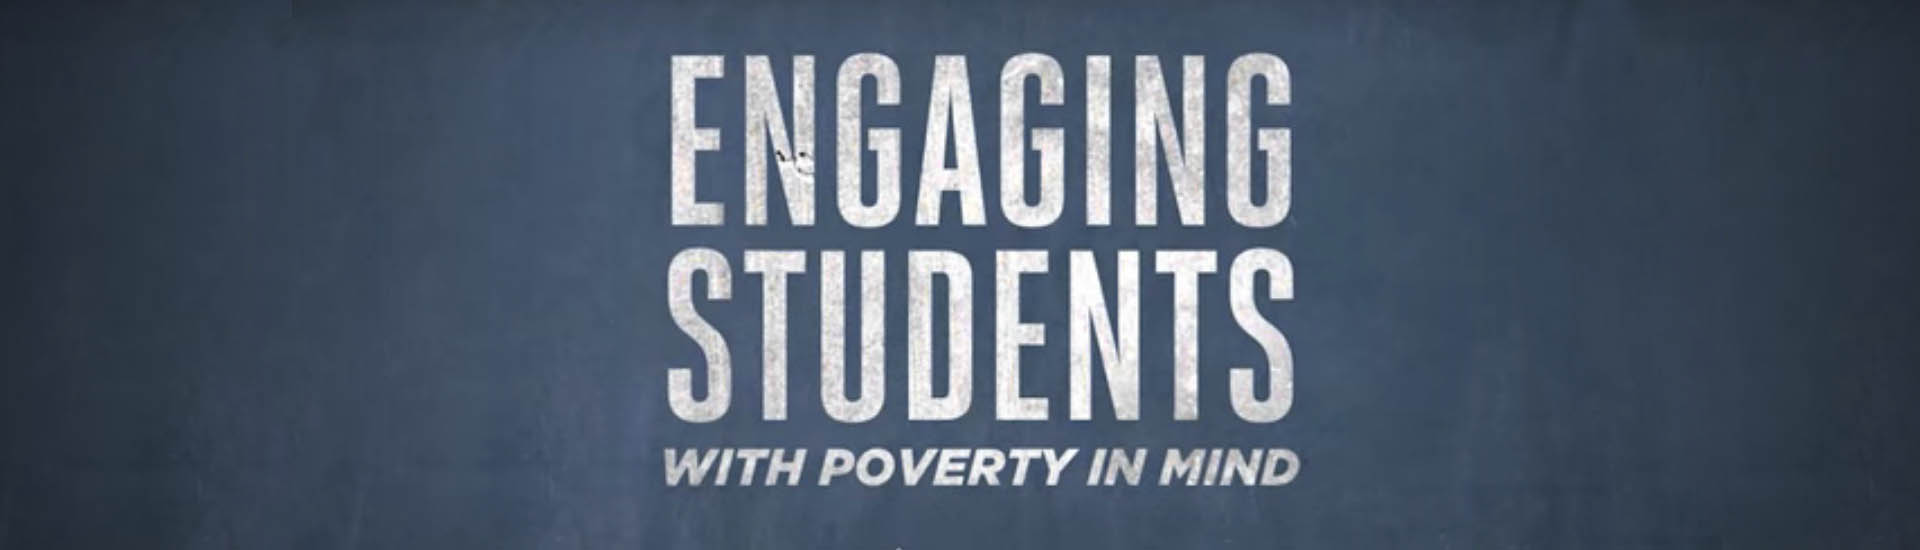 Engaging Students With Poverty in Mind